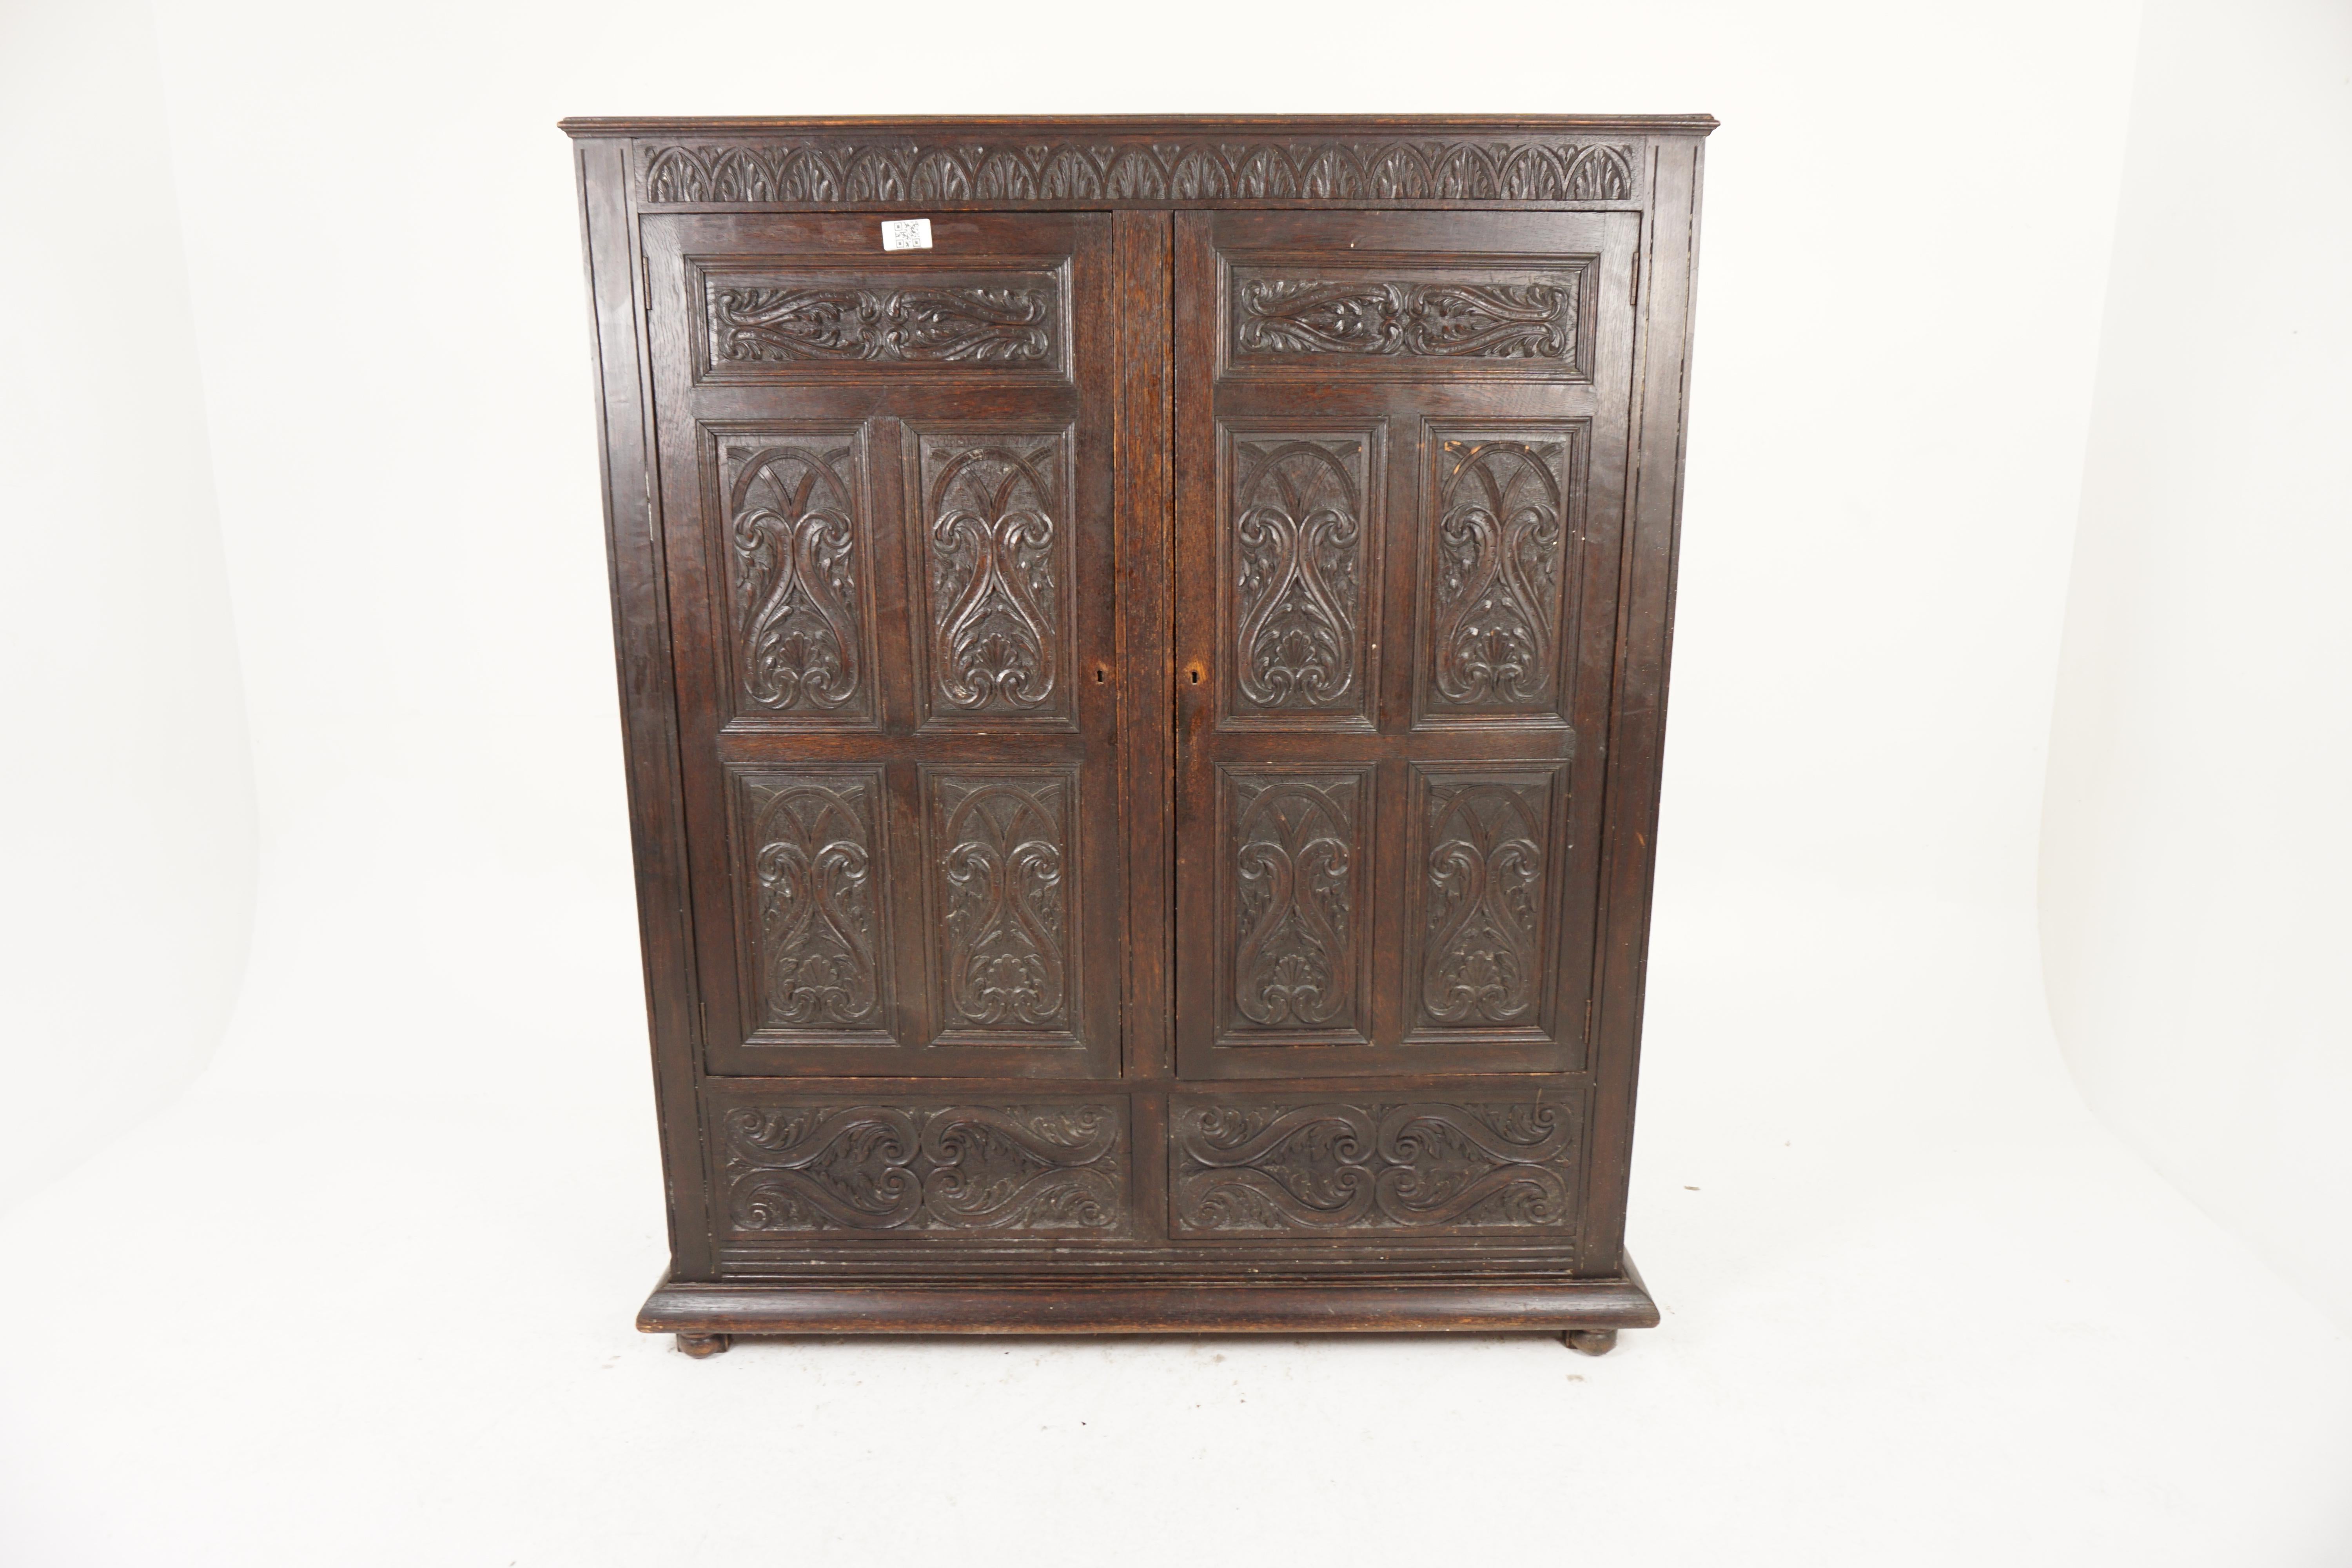 Antique Gothic Oak Housekeeper Cupboard, Hall, Armoire, Scotland 1880, H985

Scotland 1880
Sold oak
Original finish
Carved top with a pair of carved panelled doors underneath
Four panels on each side
The interior has brass hooks and a mirror